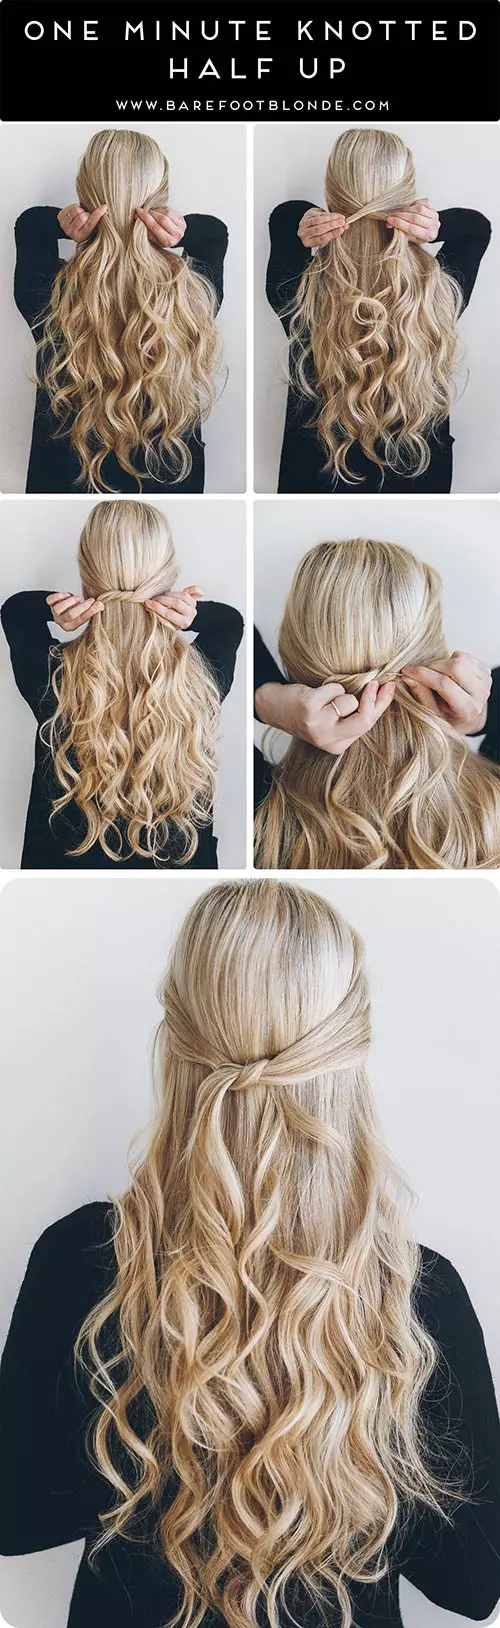 One Minute Knotted Half Up.(SIMPLE) Hairstyle For Long Hair Girls